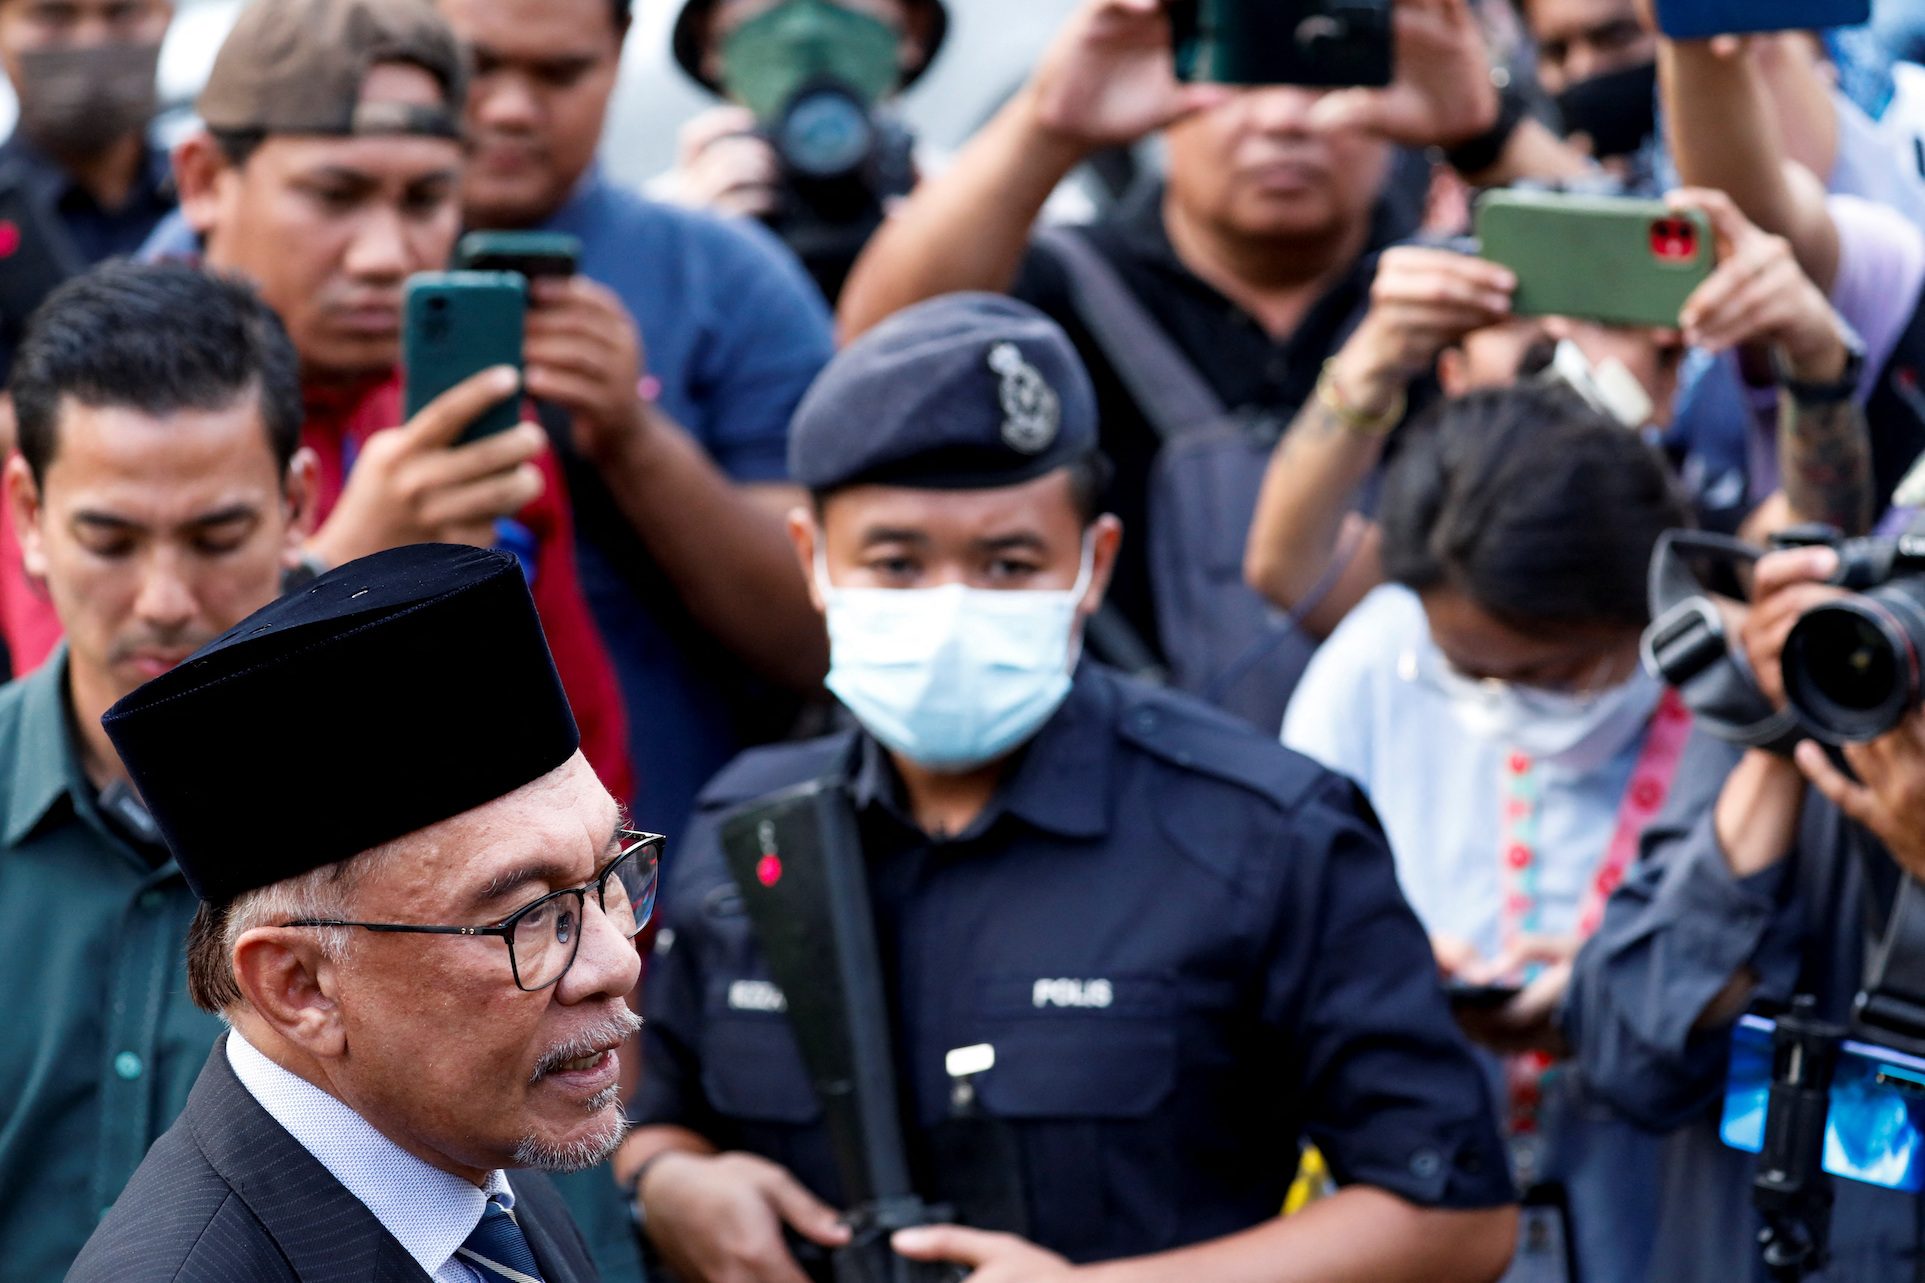 TikTok on ‘high alert’ in Malaysia as tensions rise over election wrangle